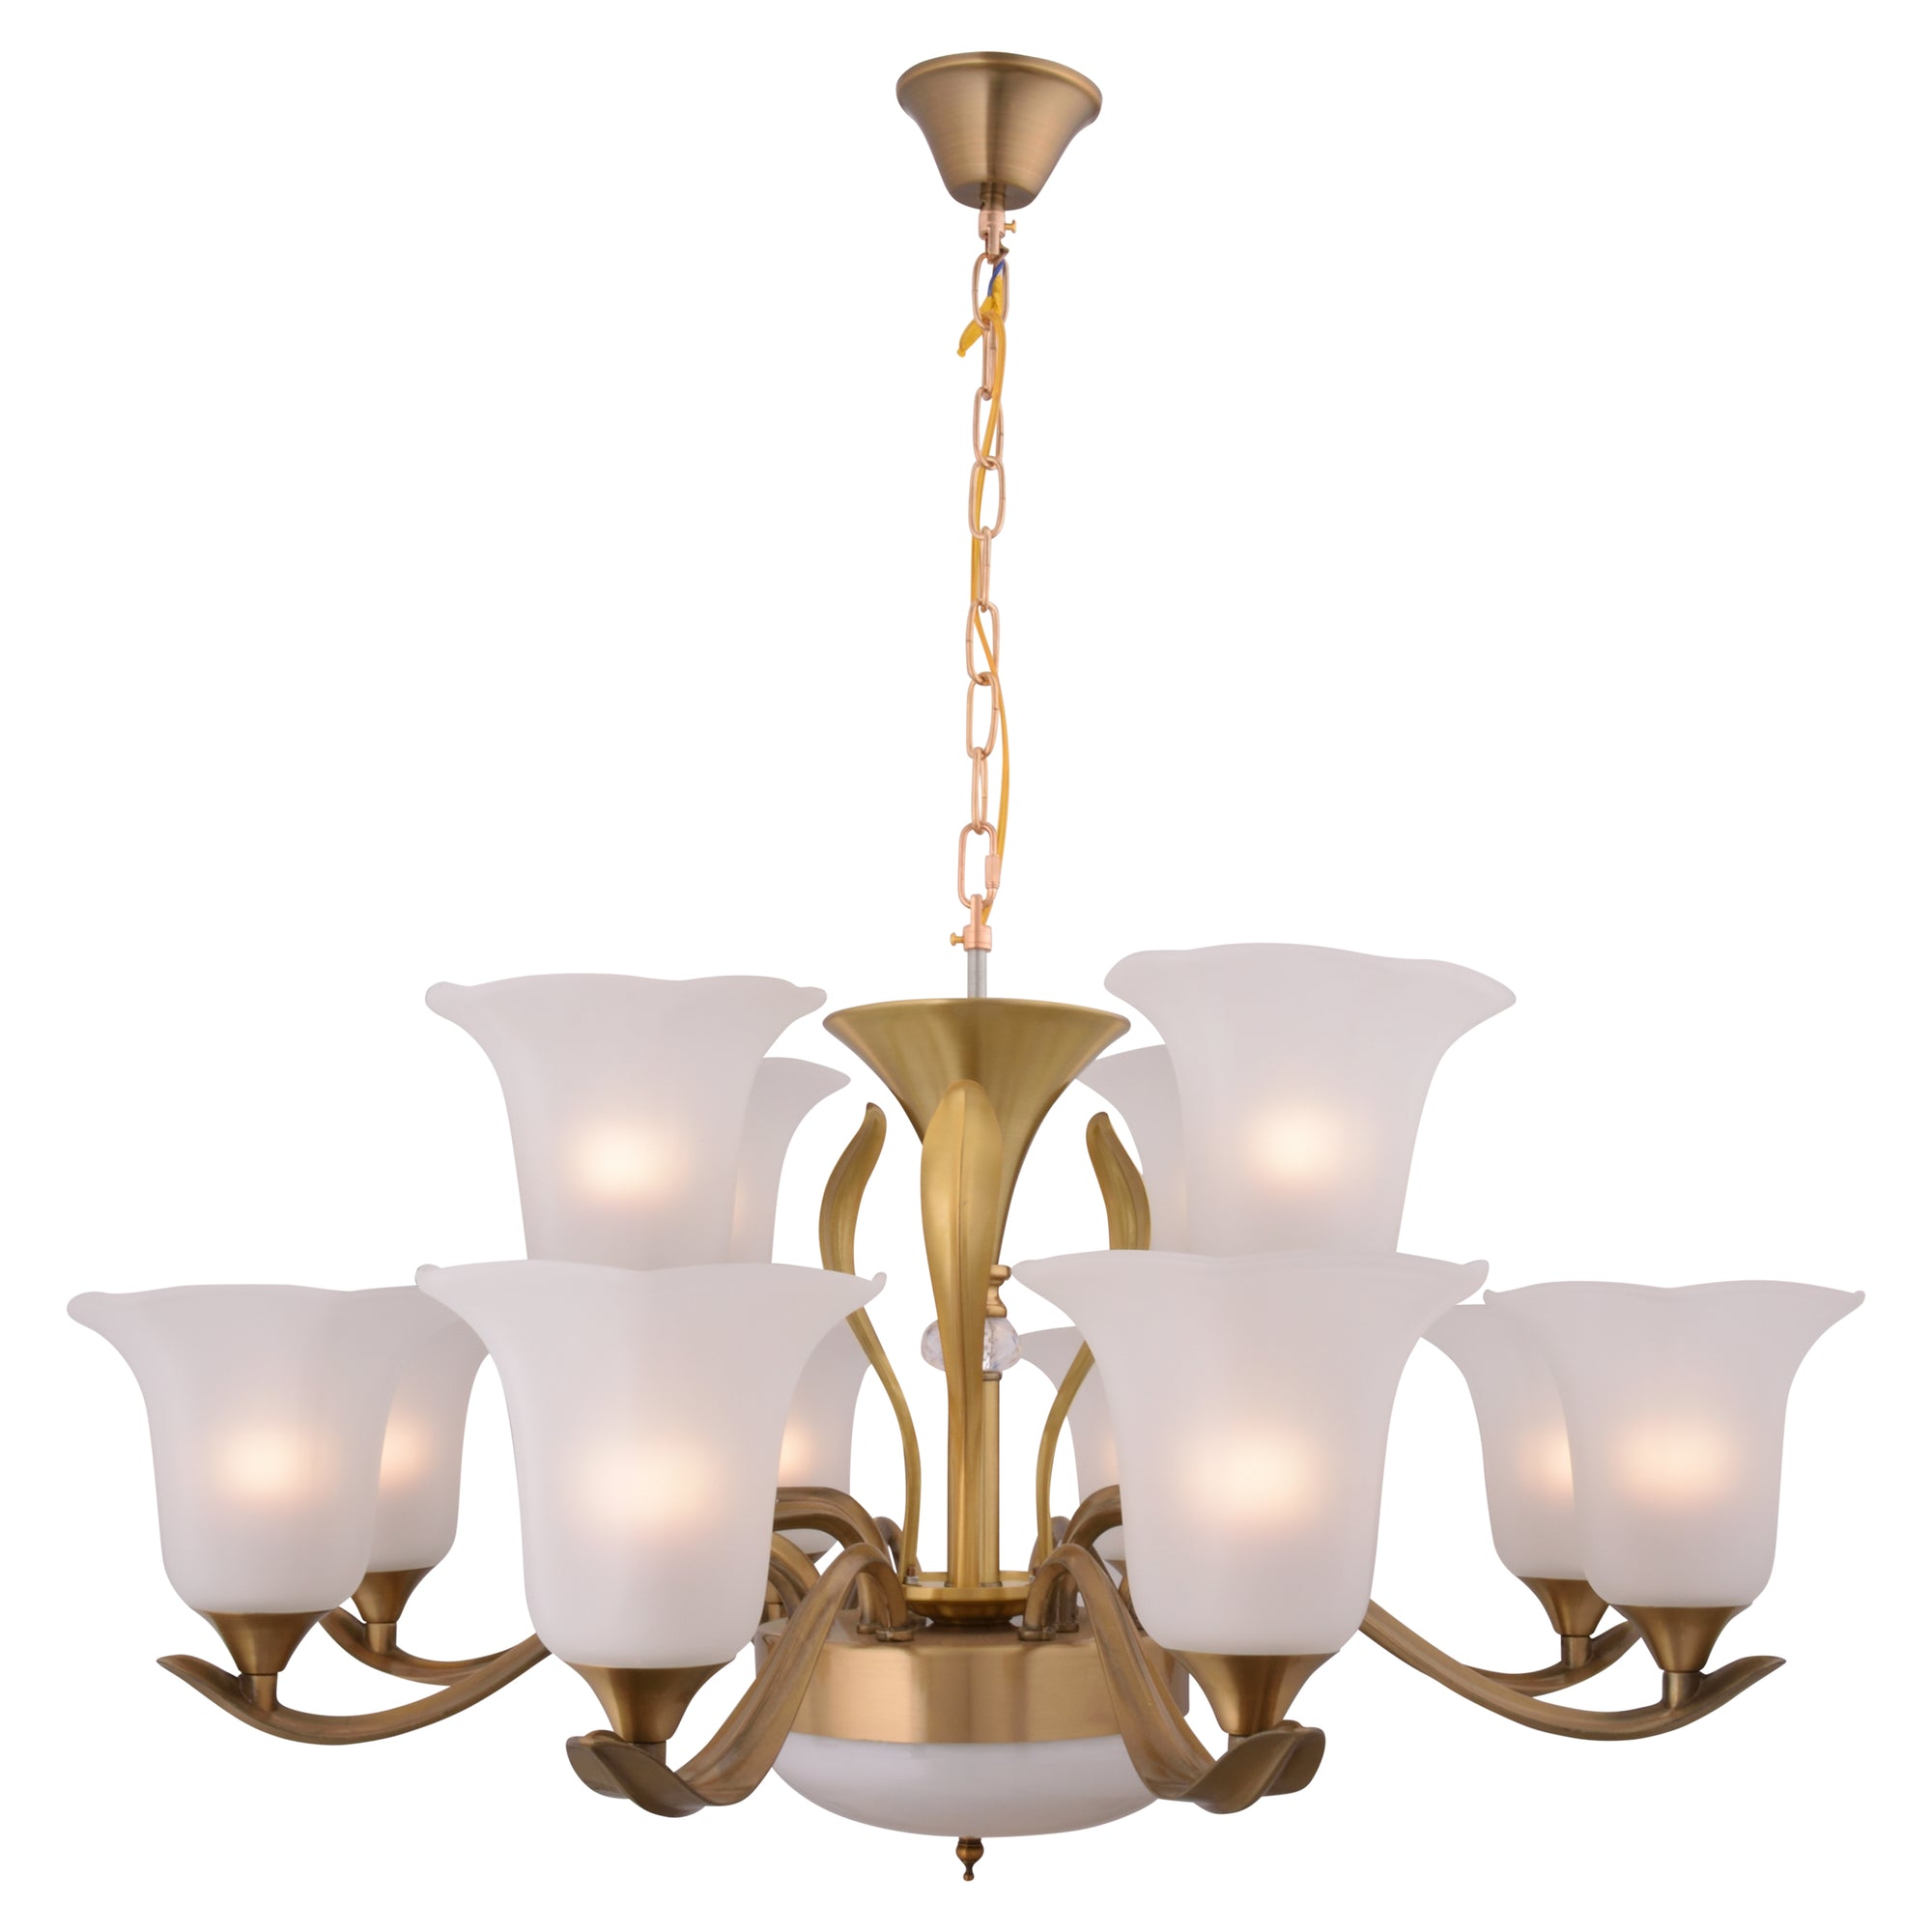 Bronze Chandelier With White Glass - 12 Lights